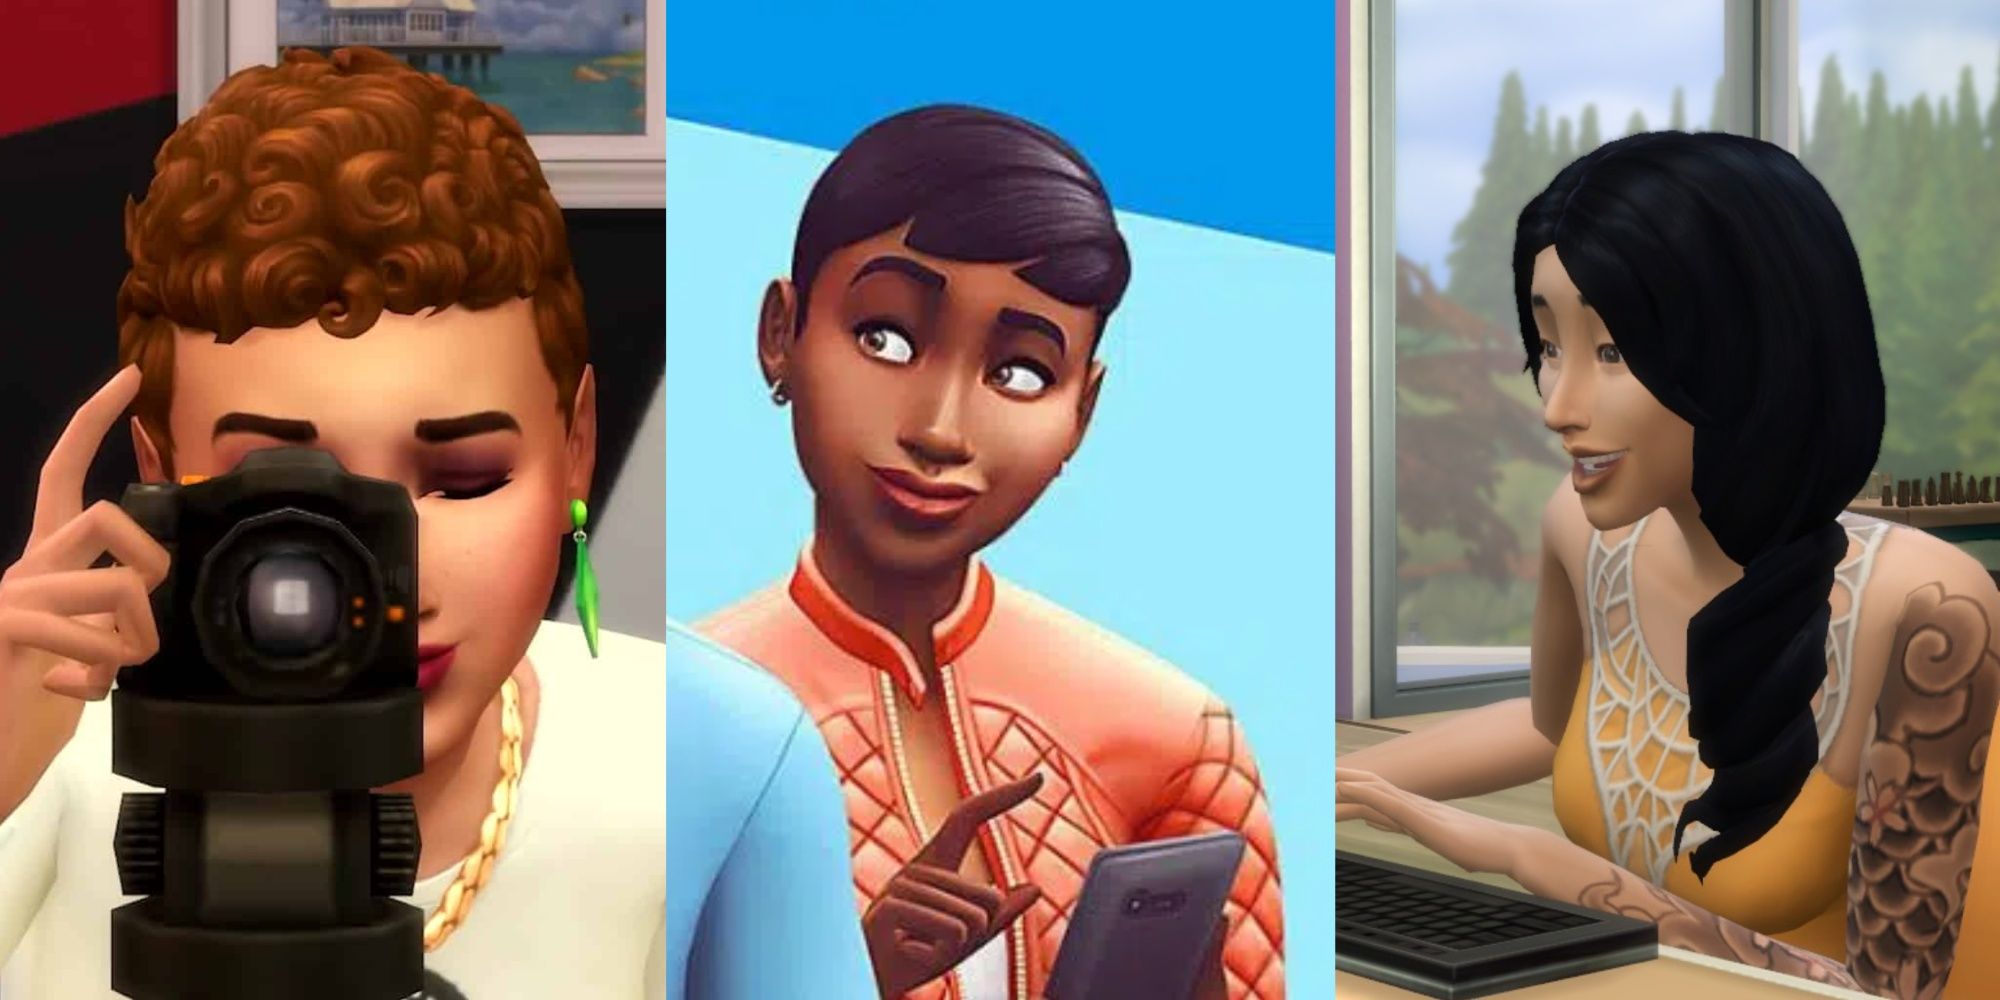 Three Sims using a camera, phone, and computer respectively.